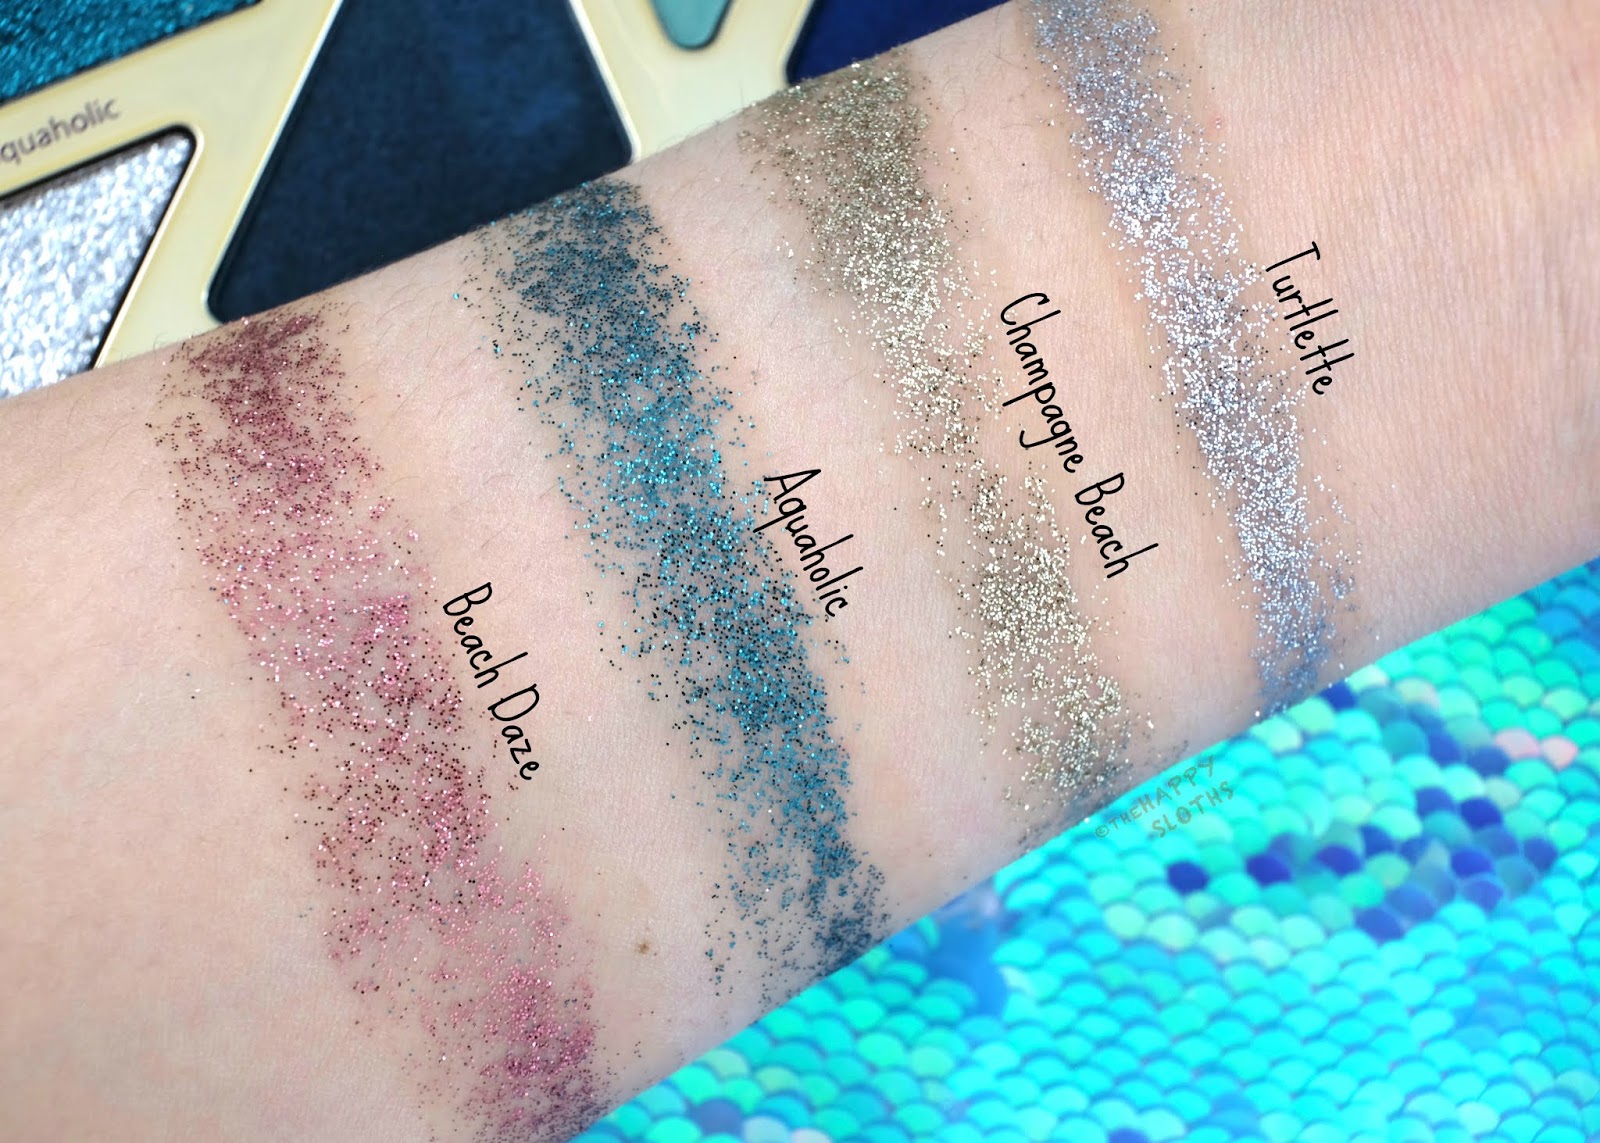 Tarte | Rainforest of the Sea High Tides & Good Vibes Eyeshadow Palette: Review and Swatches